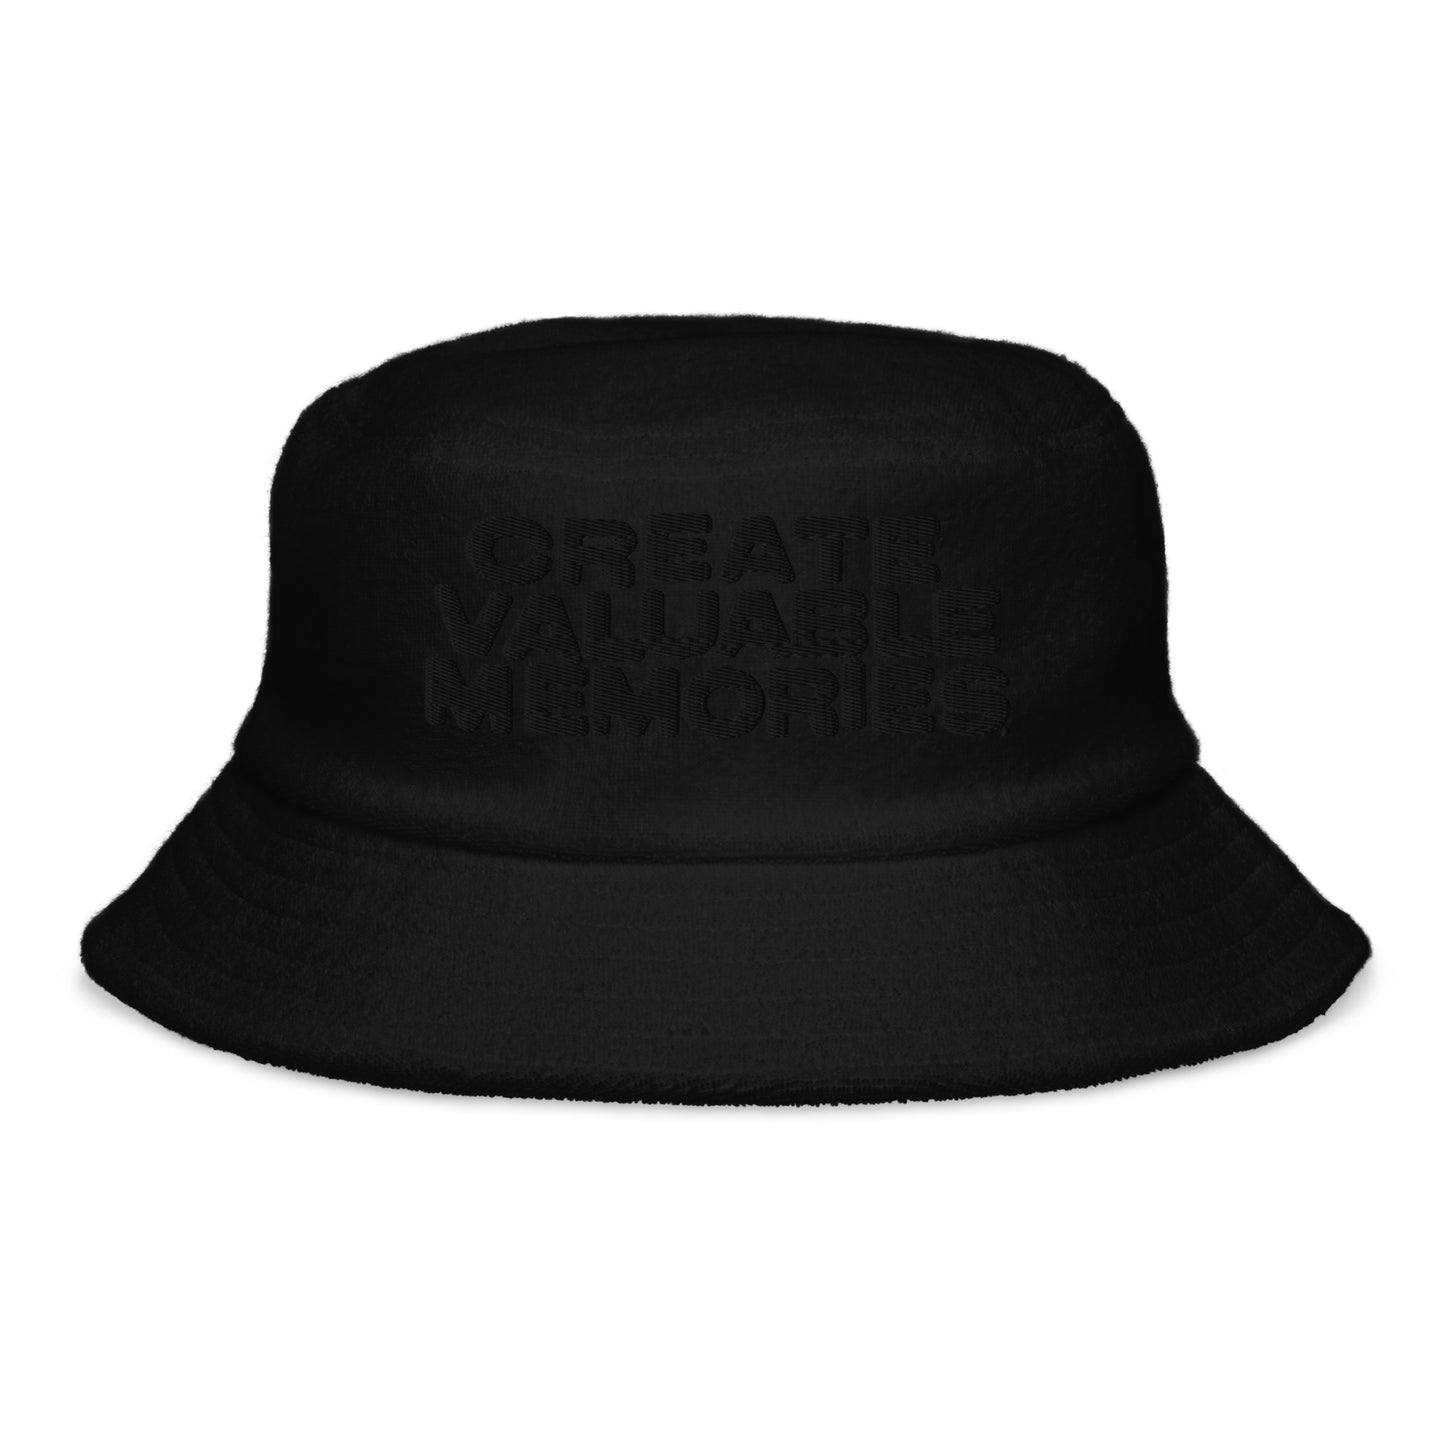 CVM S6 "BLACK-OUT" BUCKET HAT